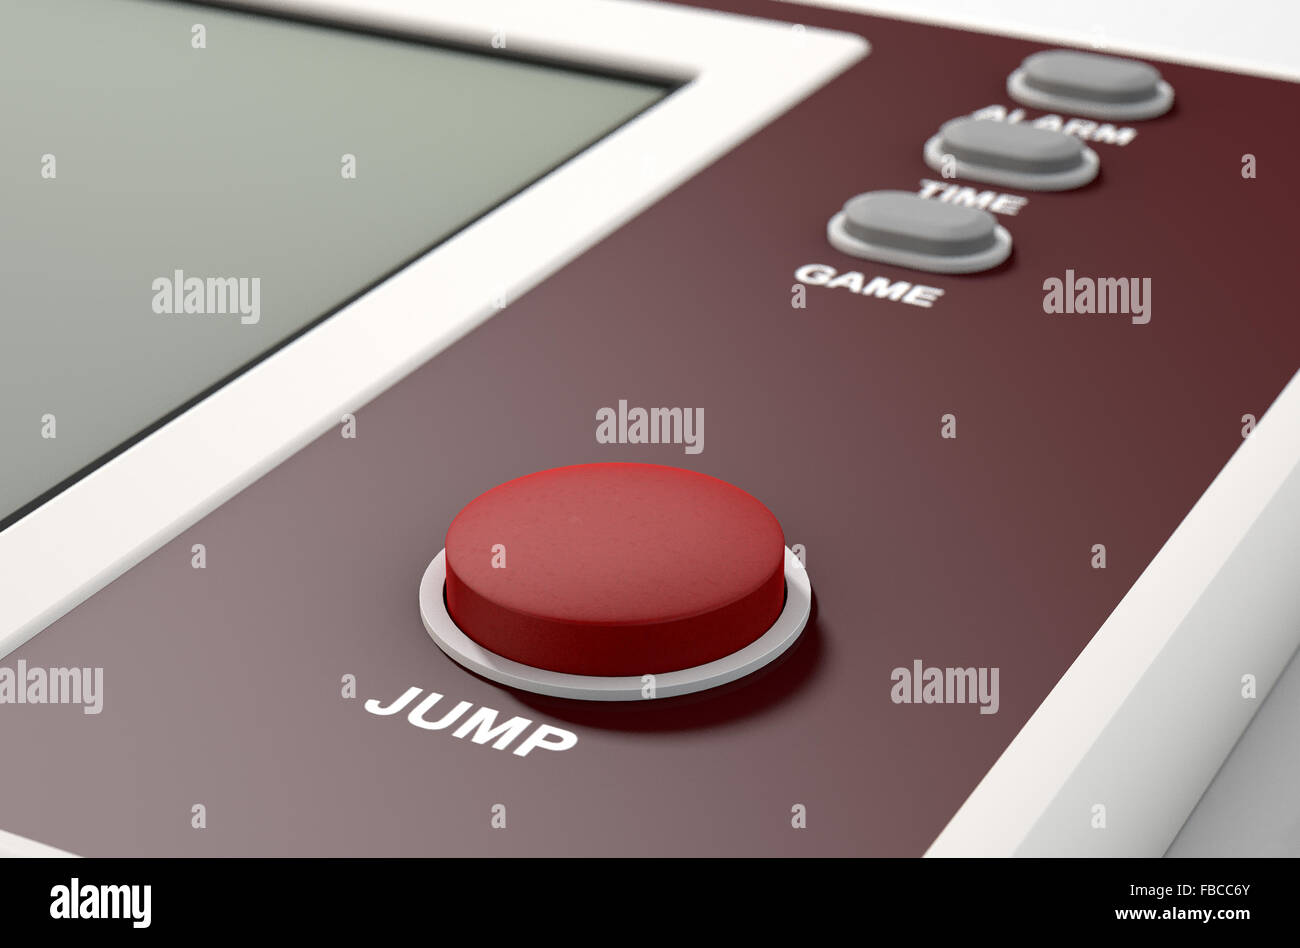 A vintage handheld video game console with a blank screen on an isolated white background Stock Photo